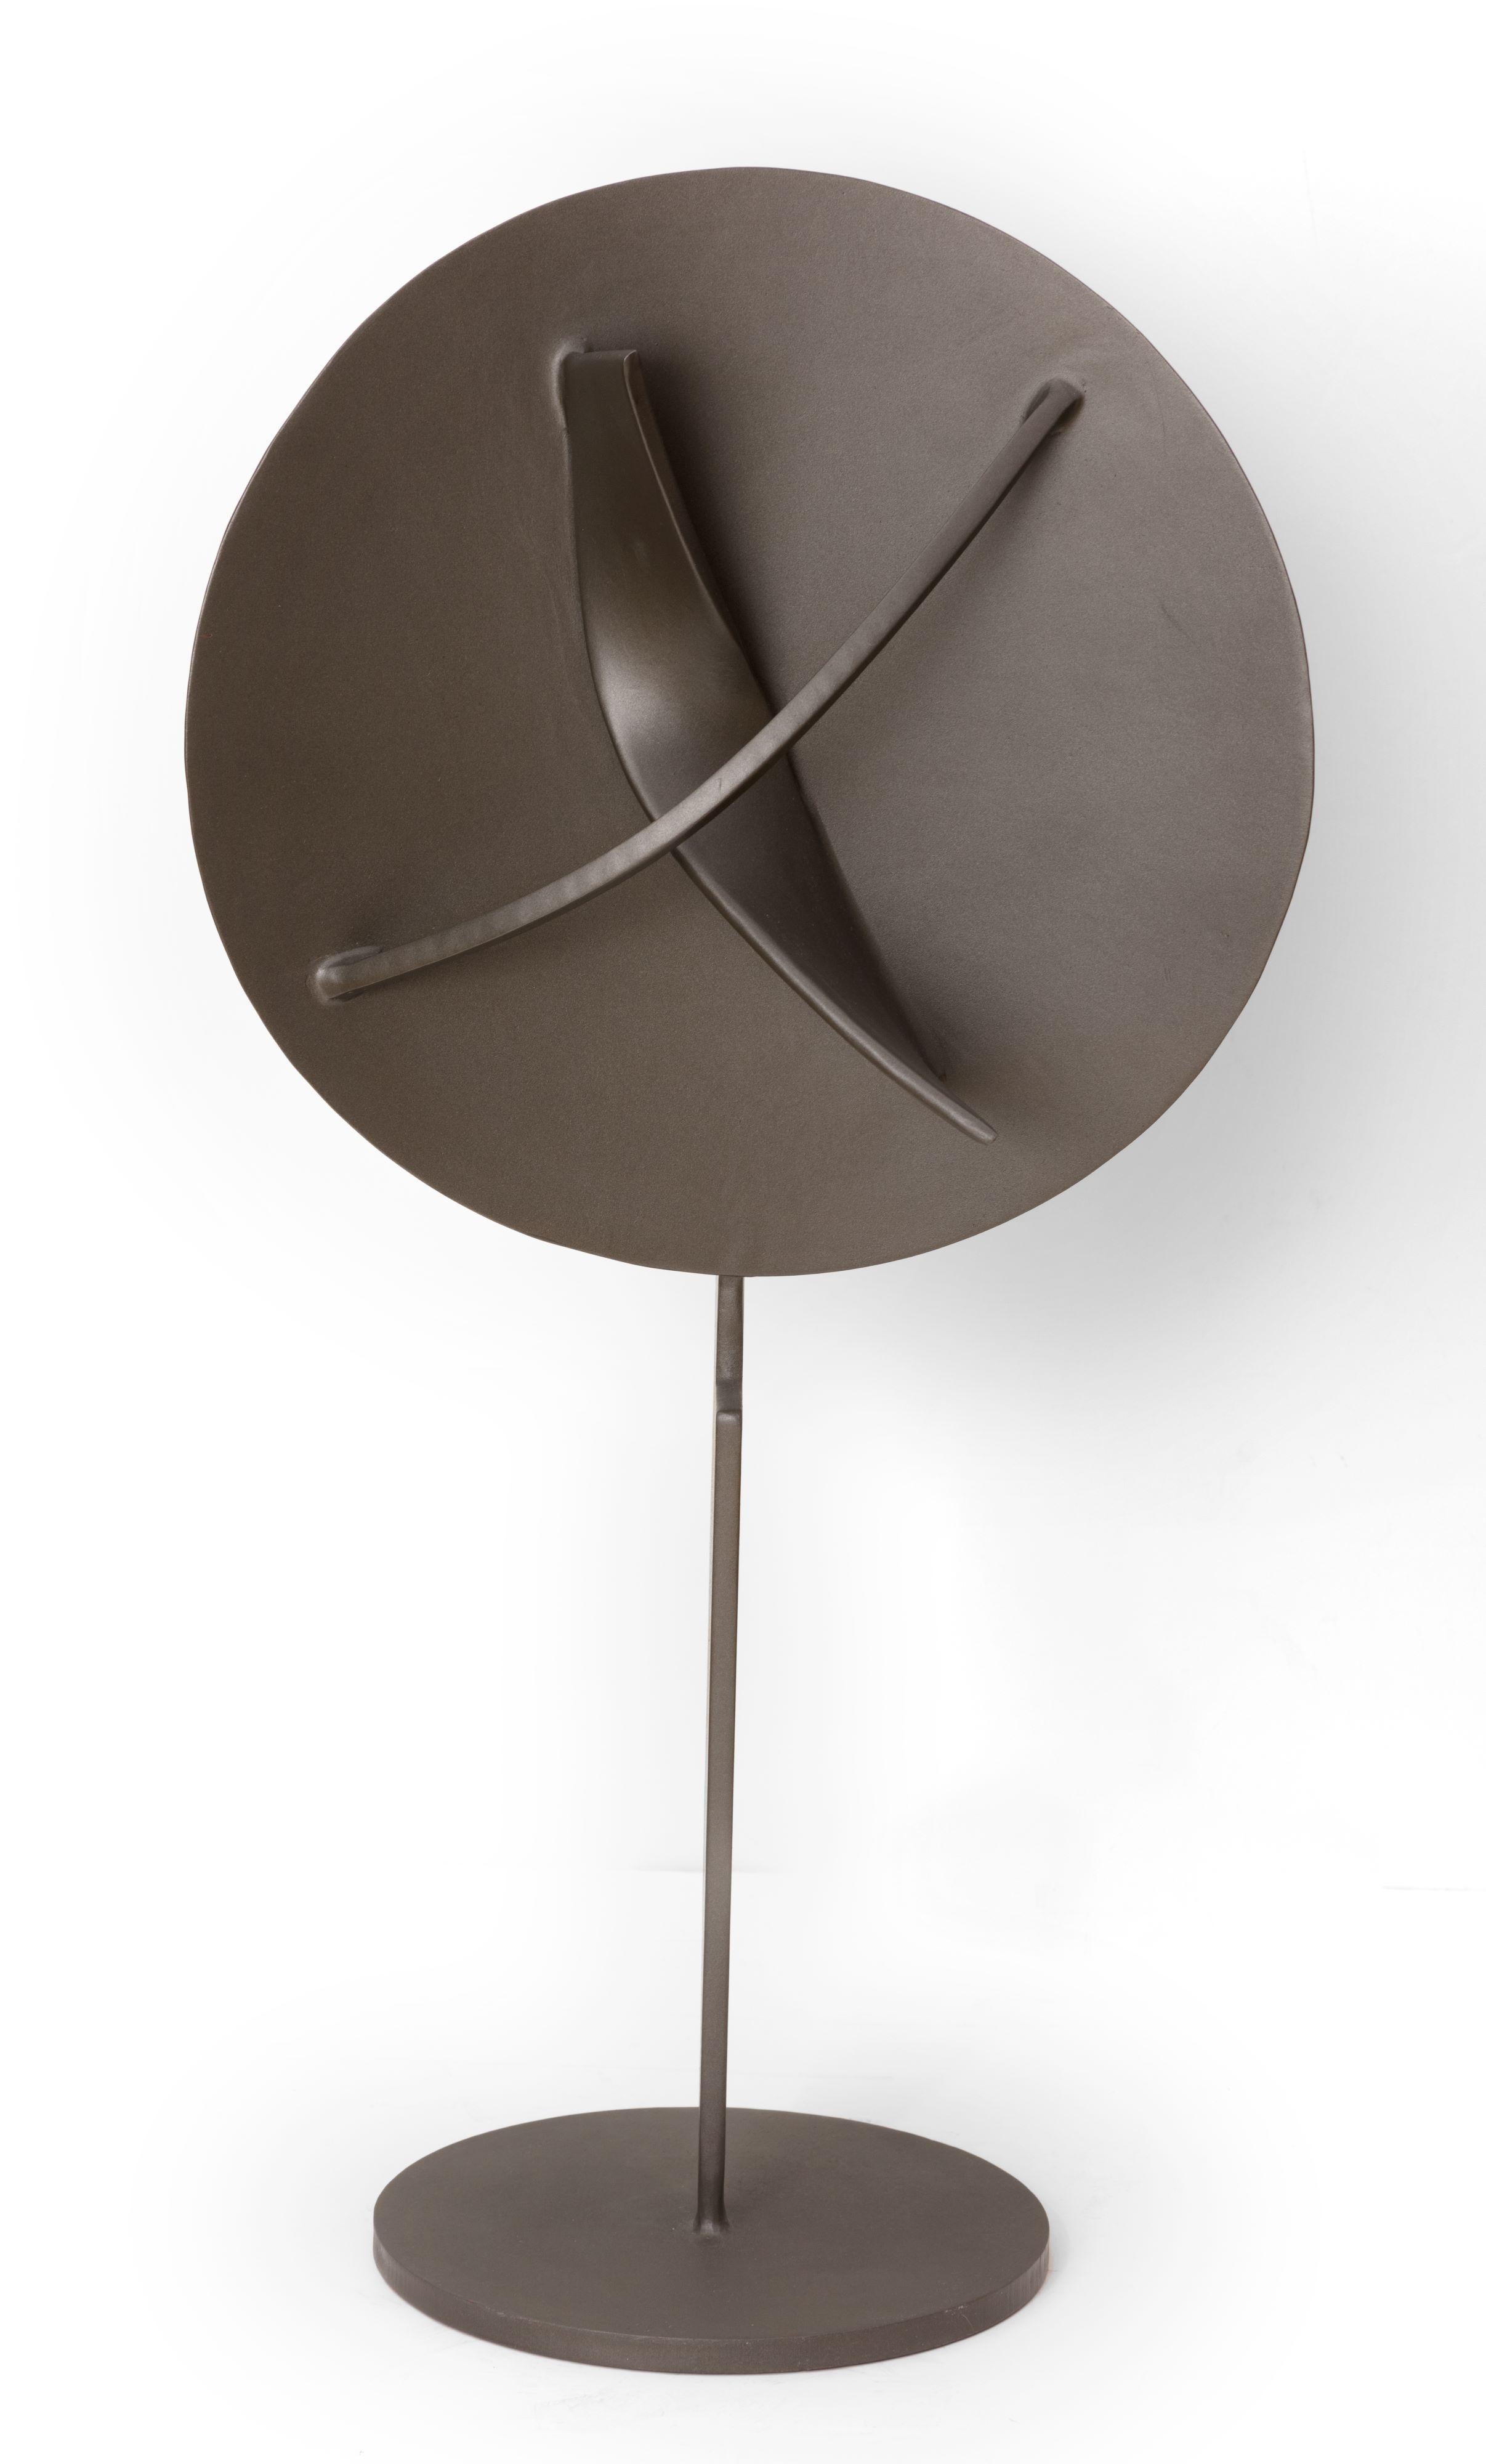 "Emerging Force" is a painted steel sculpture by Ralph Wickstrom created in 2000. From the front view, this sculpture appears to be simply a concave lens held up by a thin steel rod. It's only when the viewer explores the sculpture from all sides